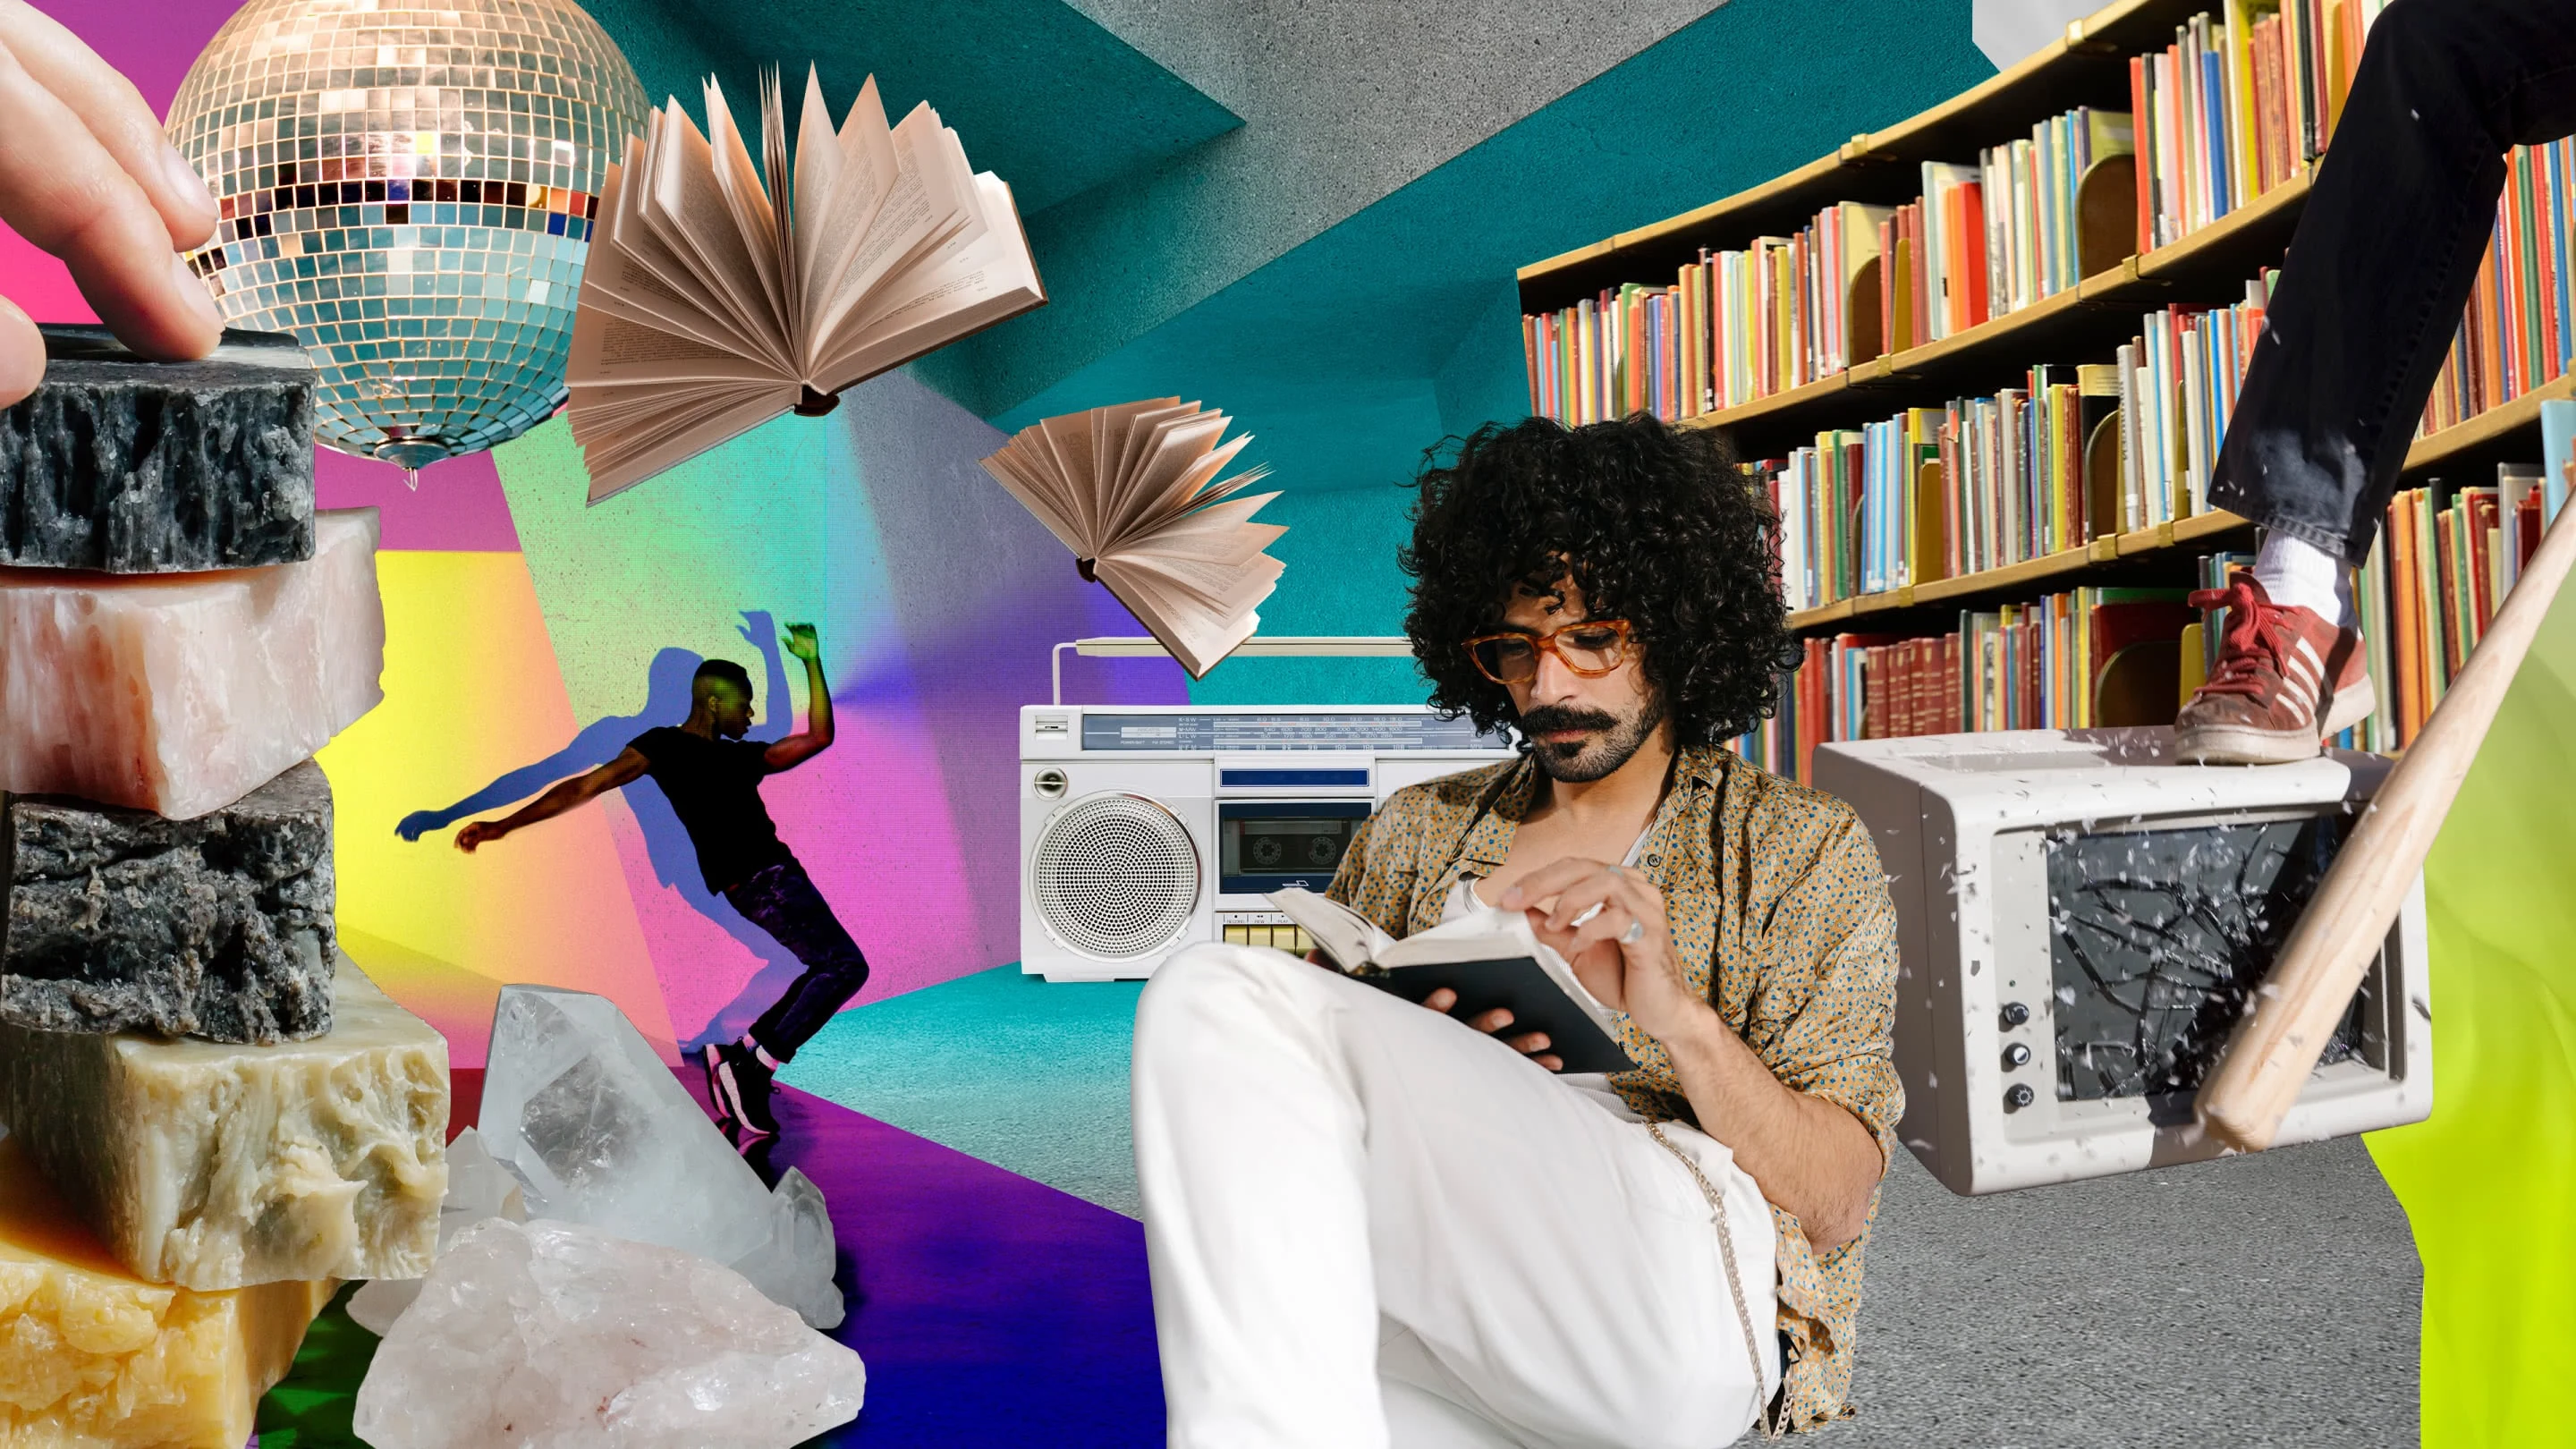 Collage of meditative and emotional items. White hand touching a tower of different colored square rocks. Clear quartz and rose quartz. Disco ball. White man resting and reading a book. Black man dancing. Library stacks. Two floating books, pages fluttering. A hand with a bat breaking a computer monitor. 
